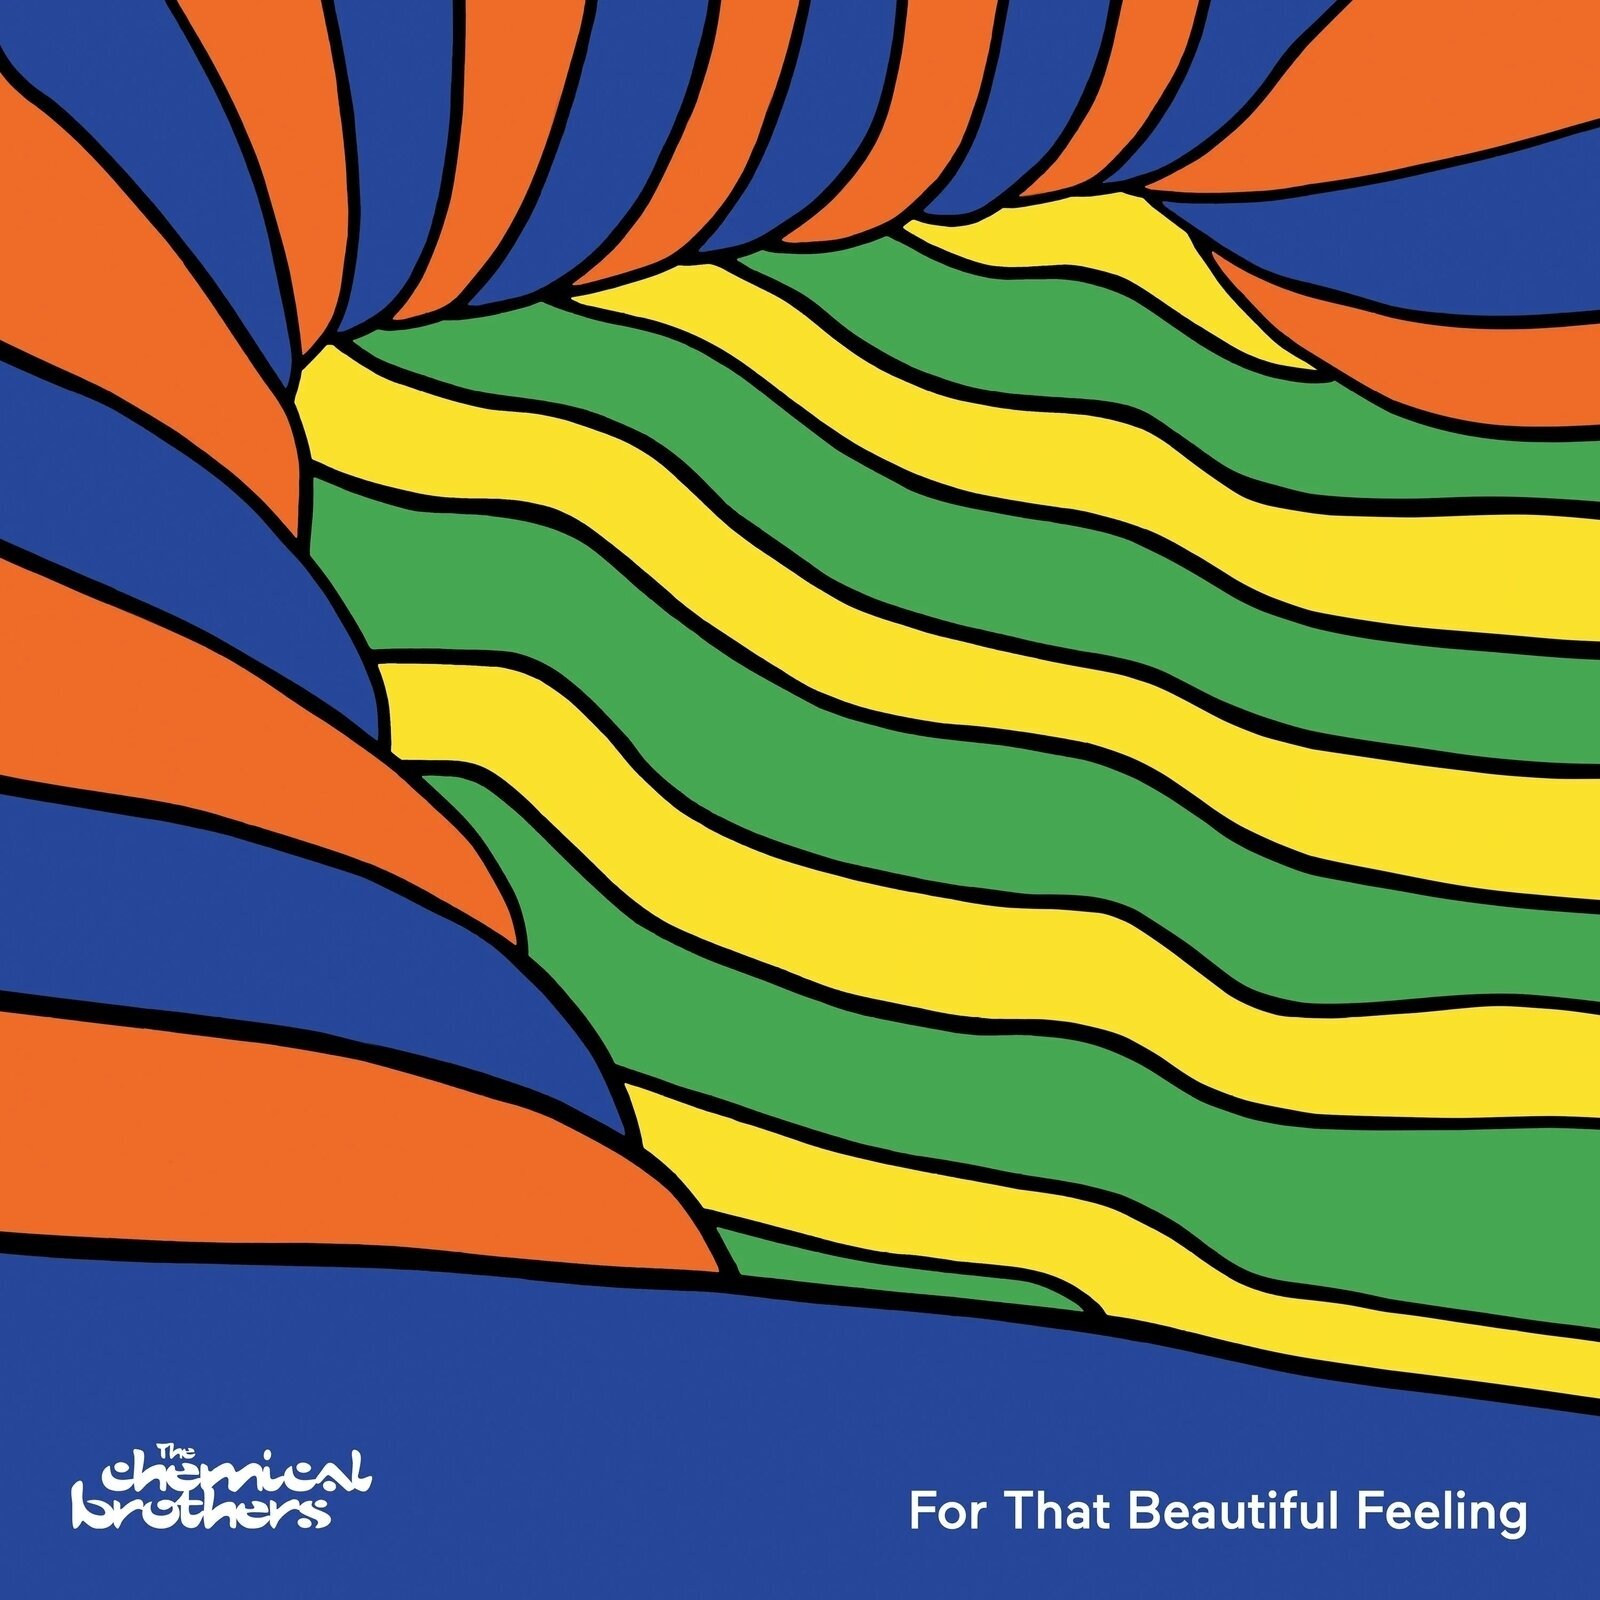 CD de música The Chemical Brothers - For That Beautiful Feeling (CD)